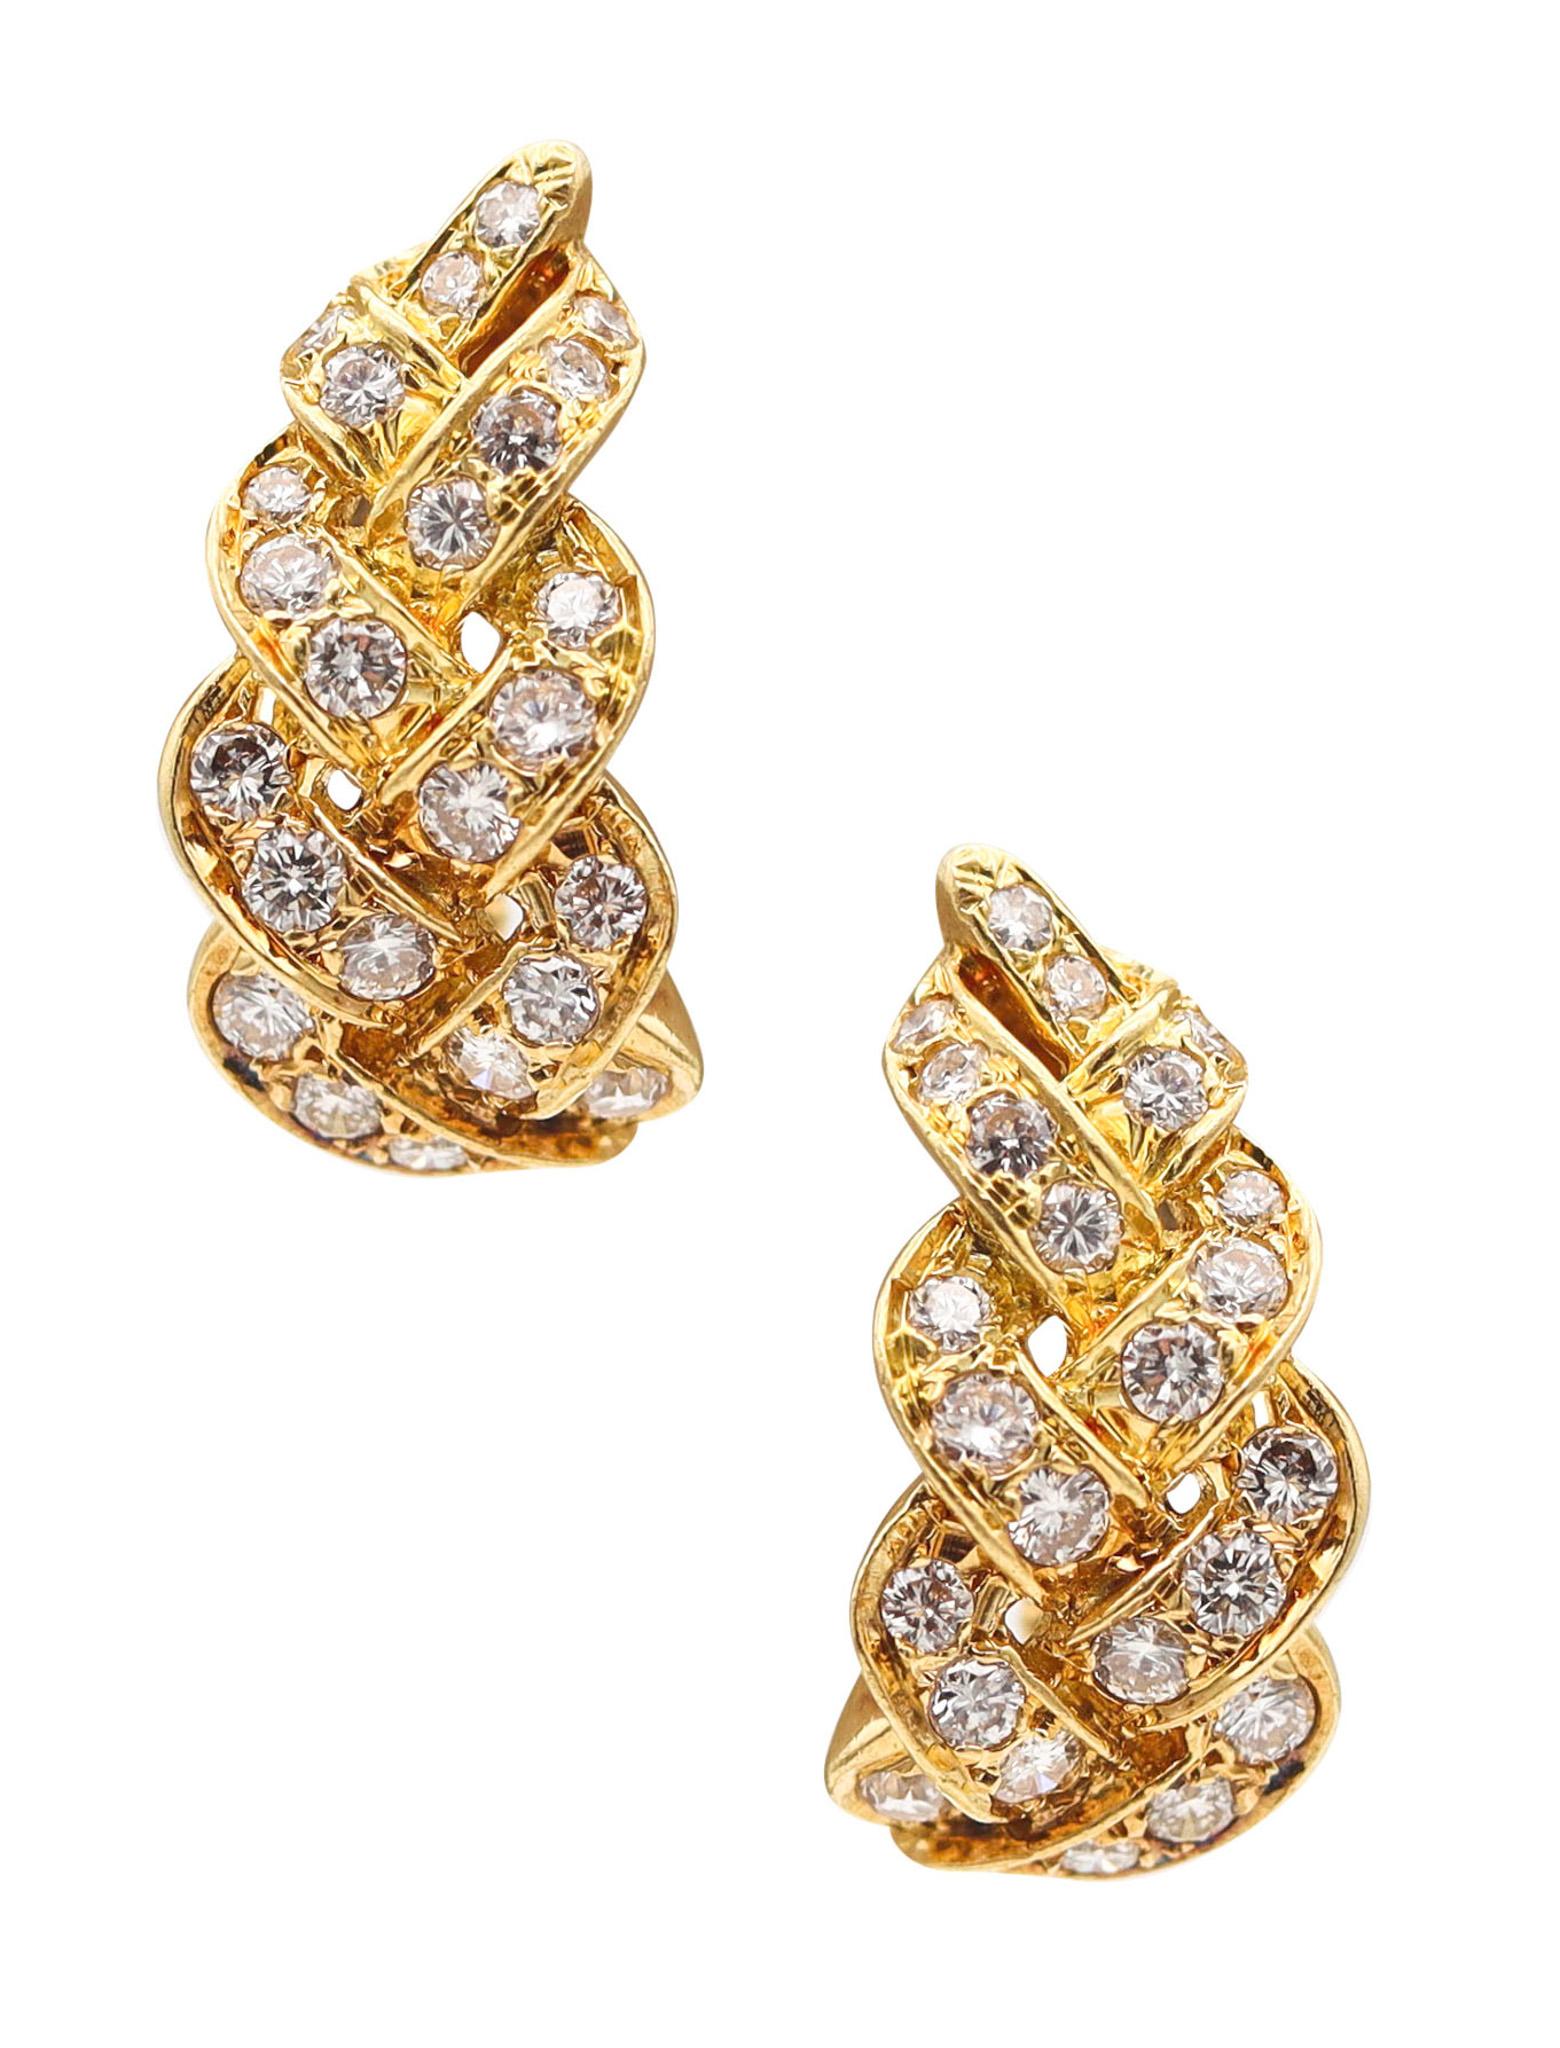 Fred Of Paris Hoops Earrings In 18Kt Yellow Gold With 2.64 Ctw In VS Diamonds